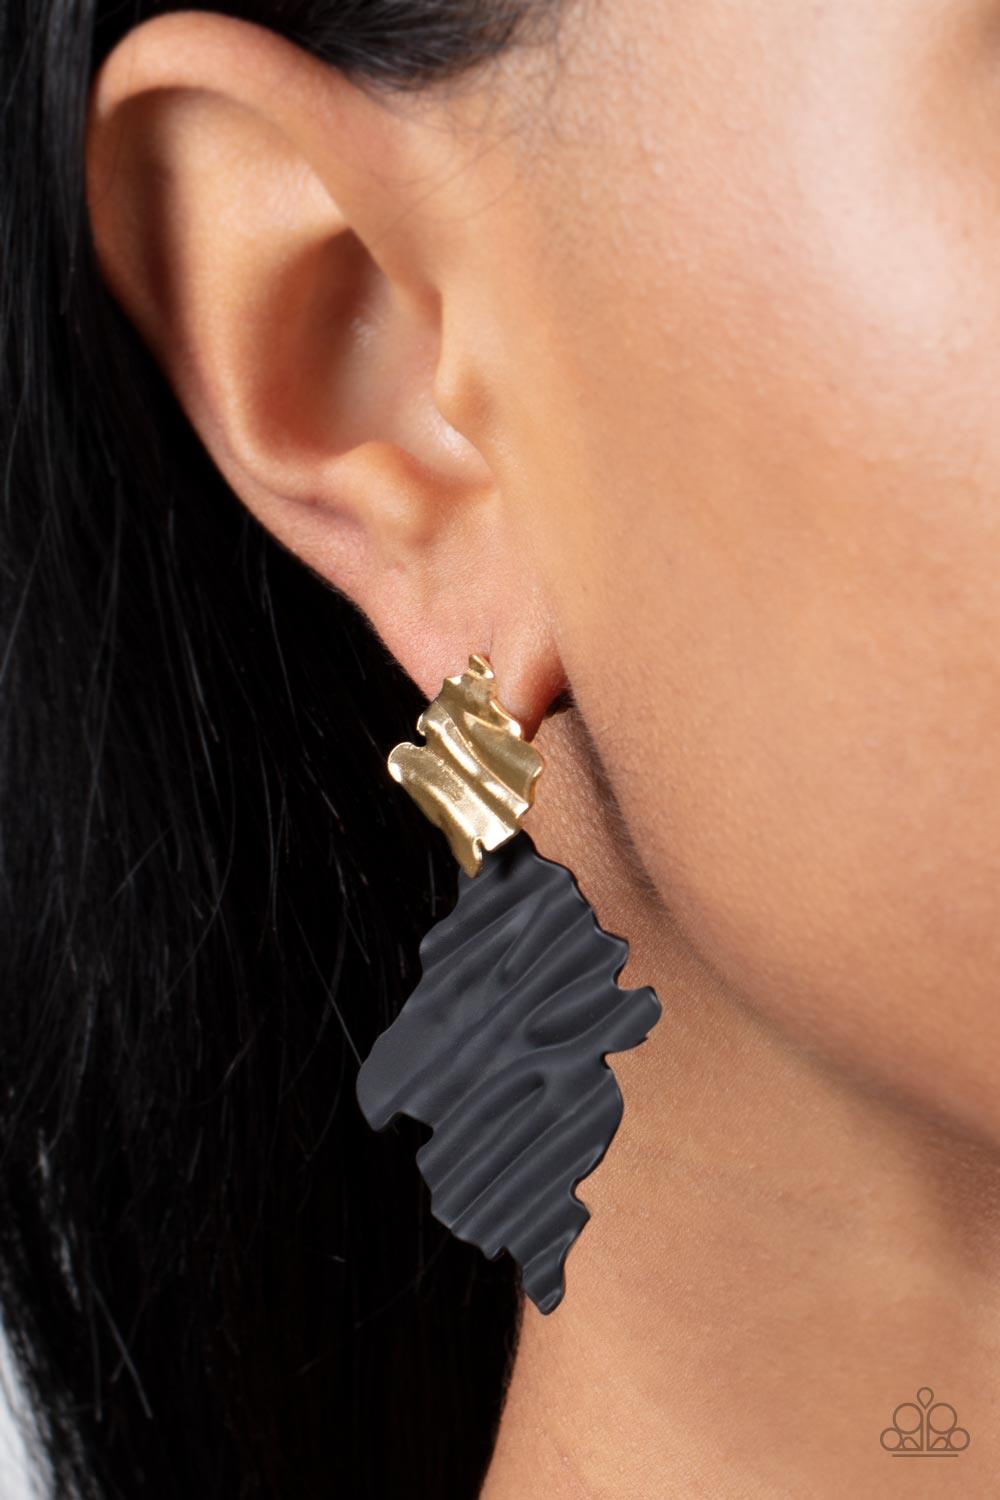 Crimped Couture Gold Earrings - Jewelry by Bretta